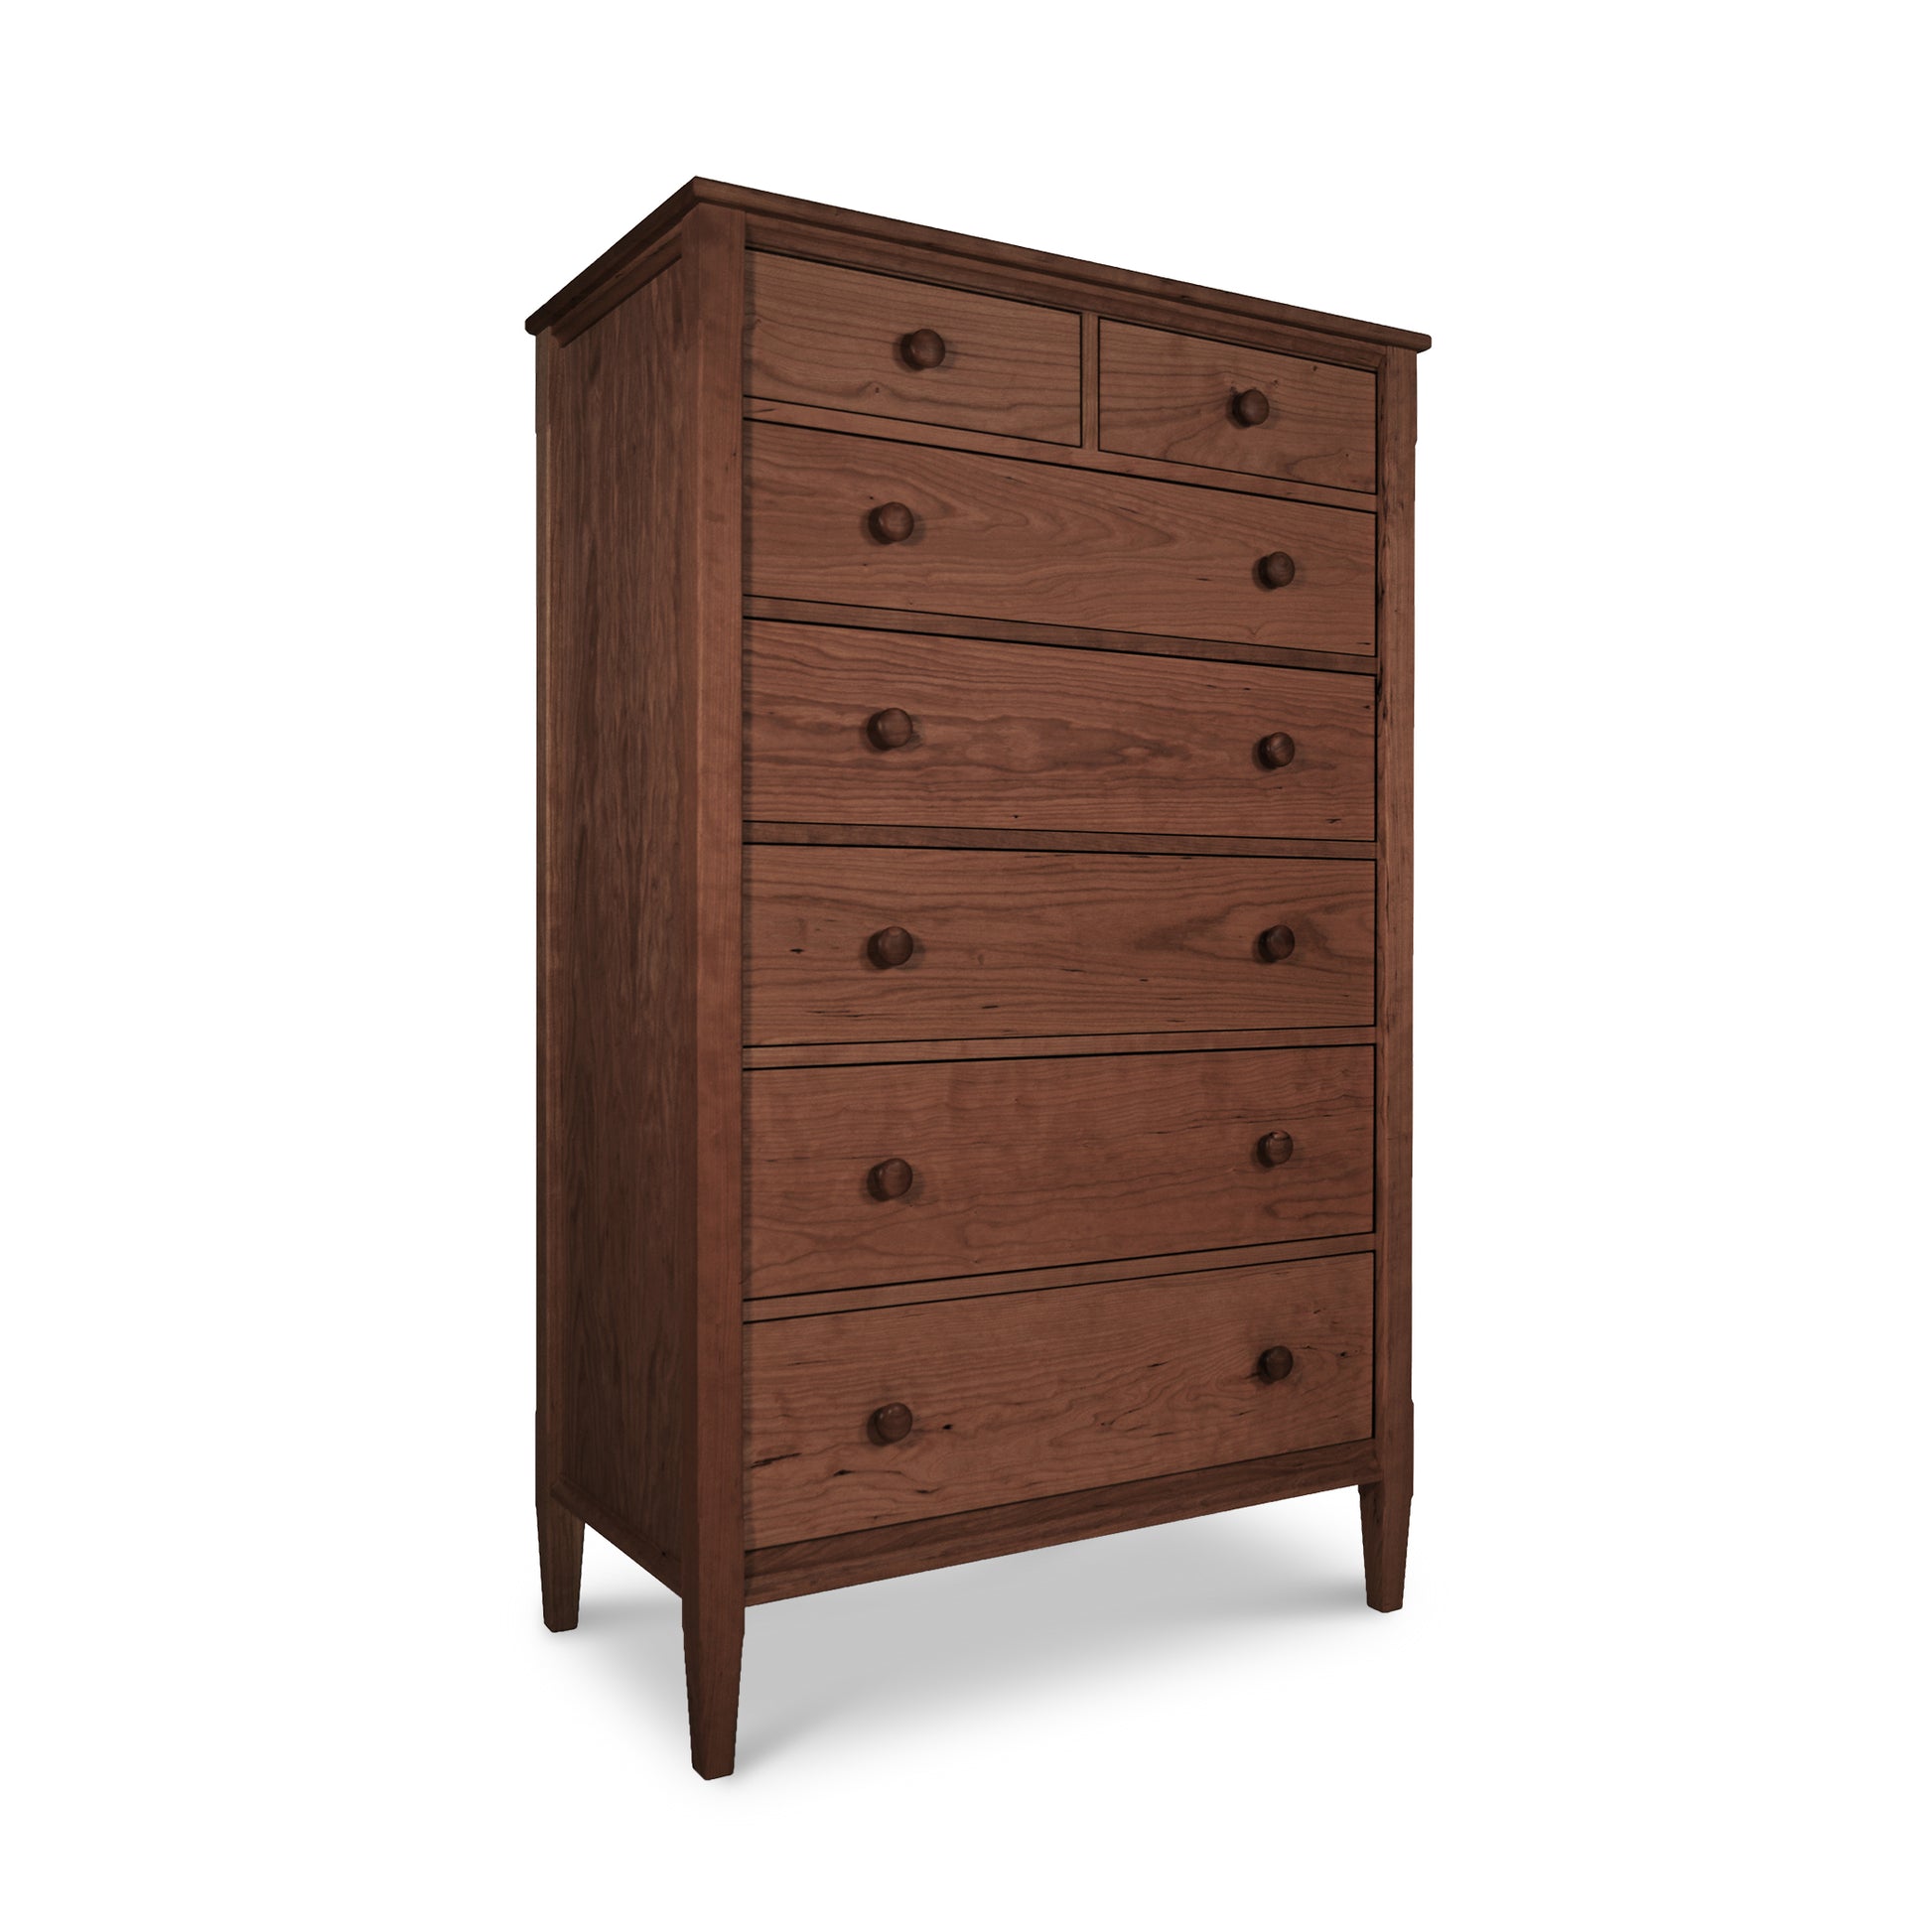 The Maple Corner Woodworks Vermont Shaker 7-Drawer Chest is a stunning piece of bedroom furniture in a rich dark brown color.